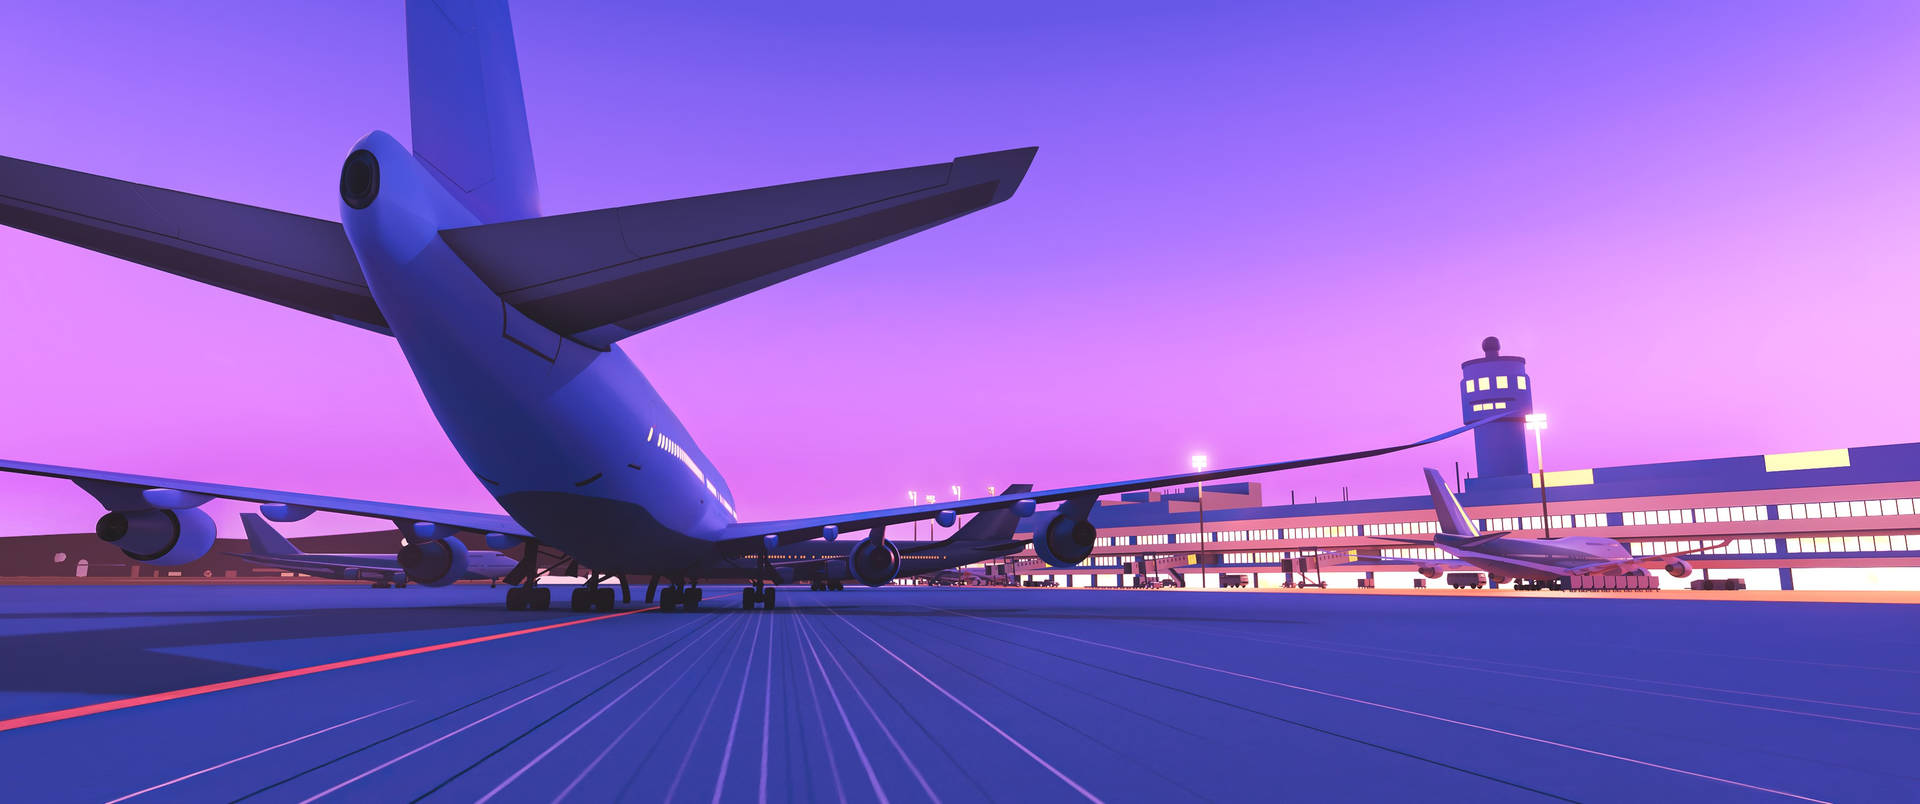 Airport With Blue Violet Sky